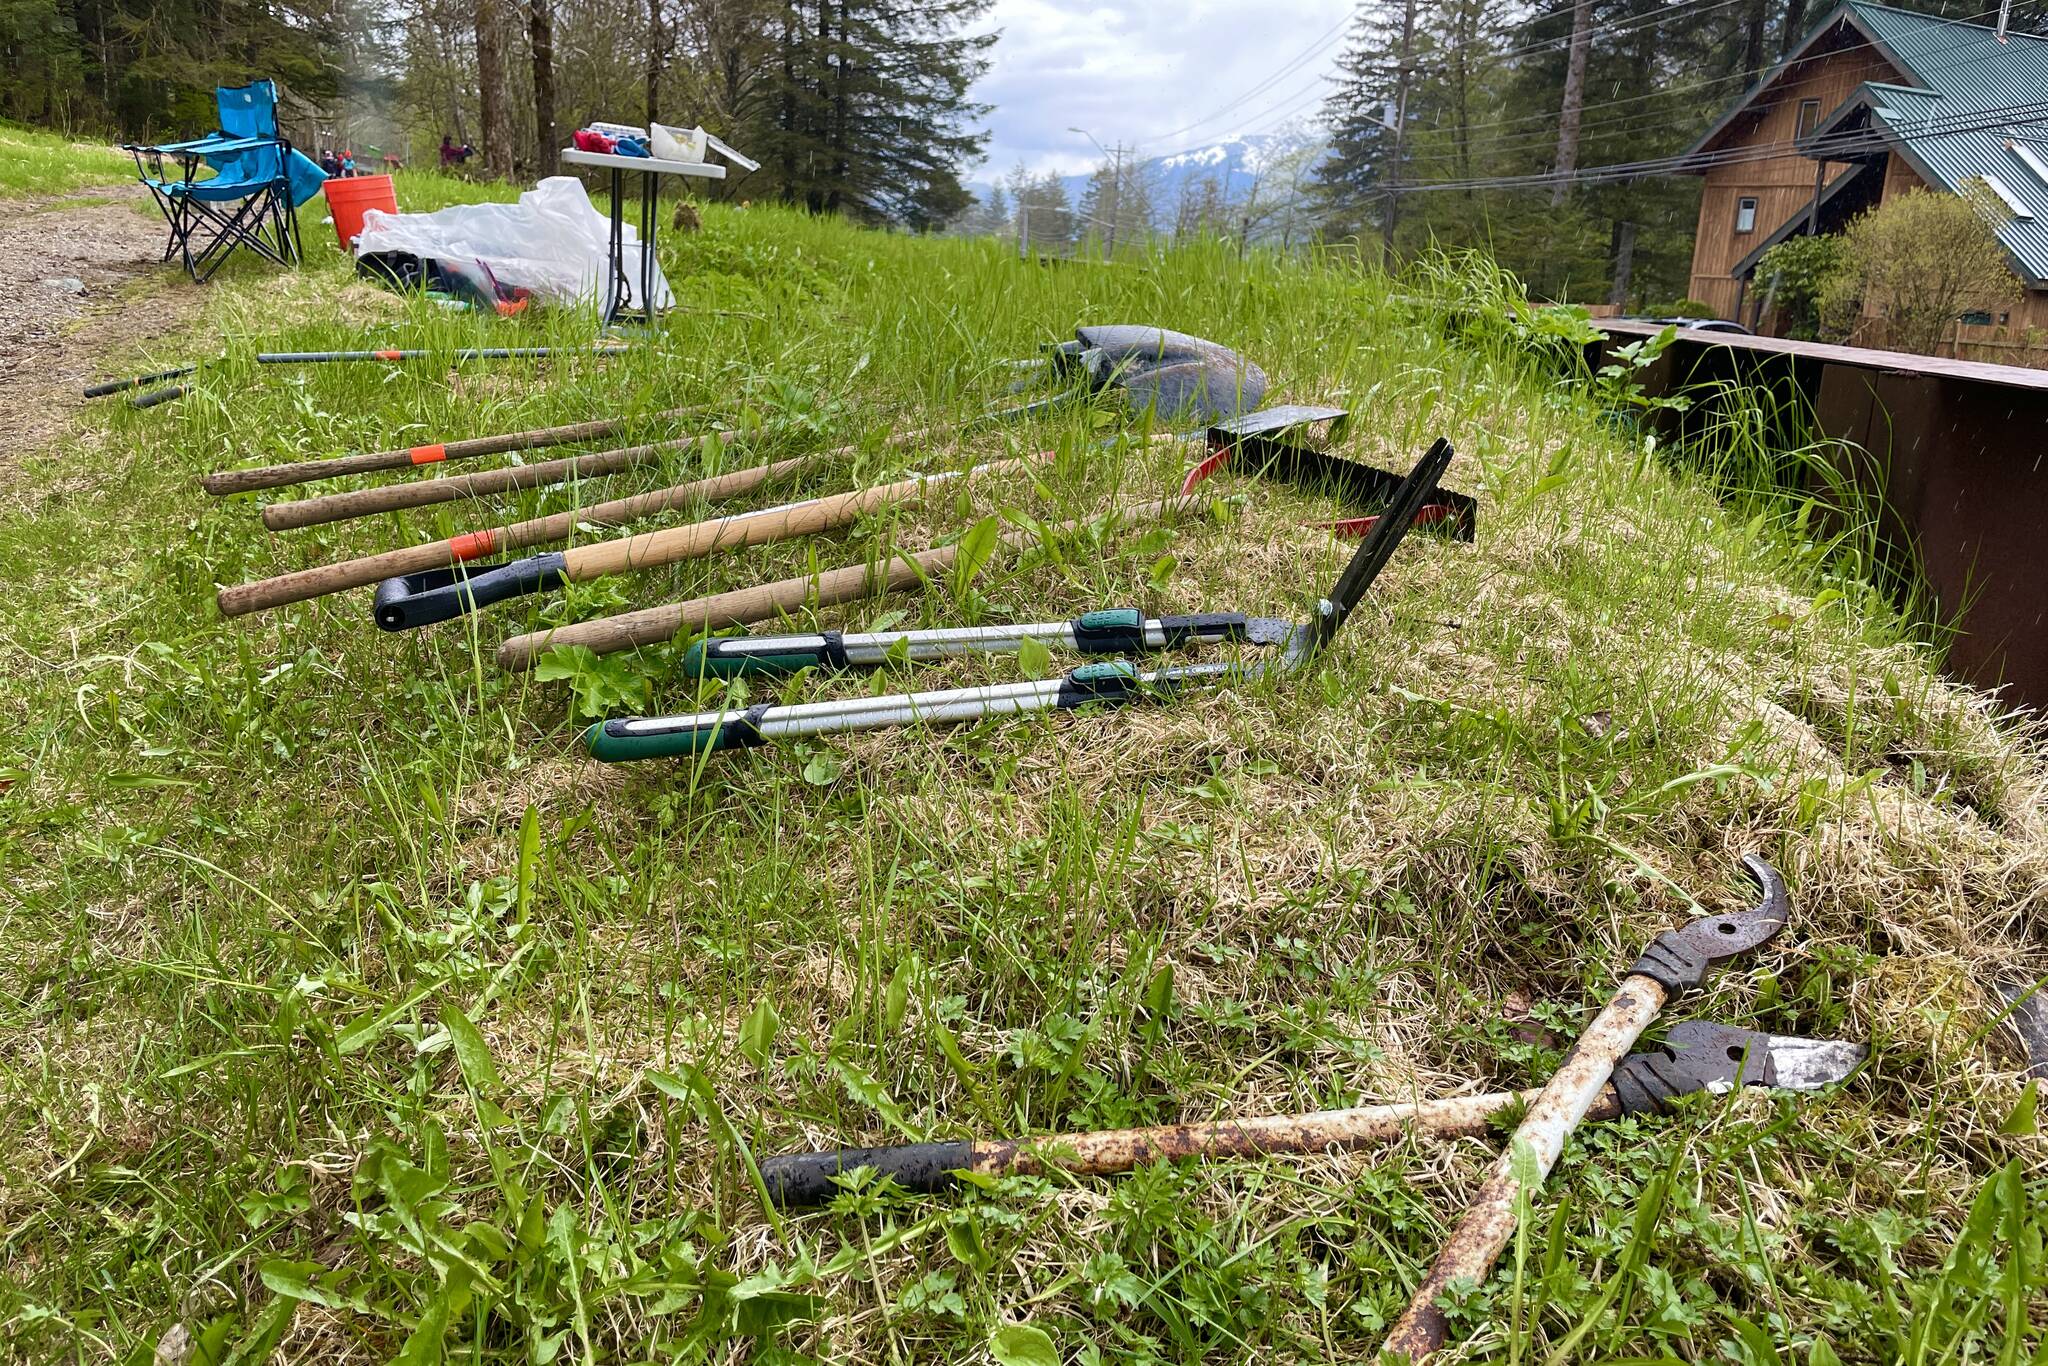 Michael S. Lockett / Juneau Empire 
Volunteers, including a number of staff, parents and kids from the Juneau Montessori School, cleared deadwood and undergrowth as part of the cleanup of the cemetery near Lawson Creek on May 14, 2022.